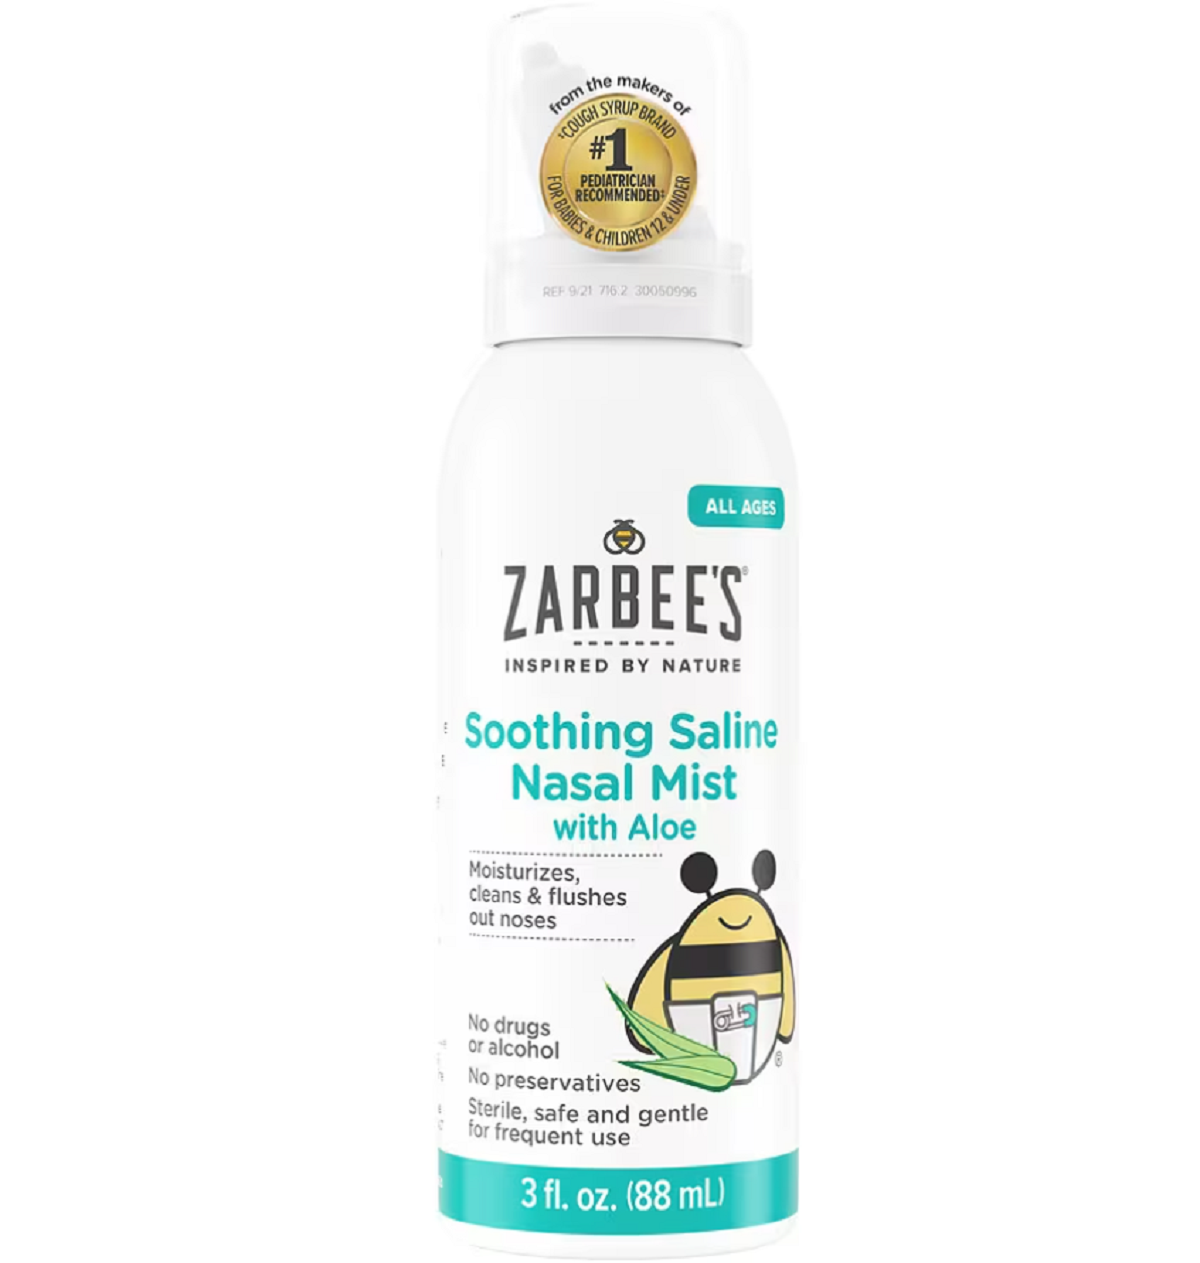 Soothing Saline Nasal Mist with Aloe Fragrance-Free3.0FL OZ-, Zarbee’s Cough or Immune Product Coupon